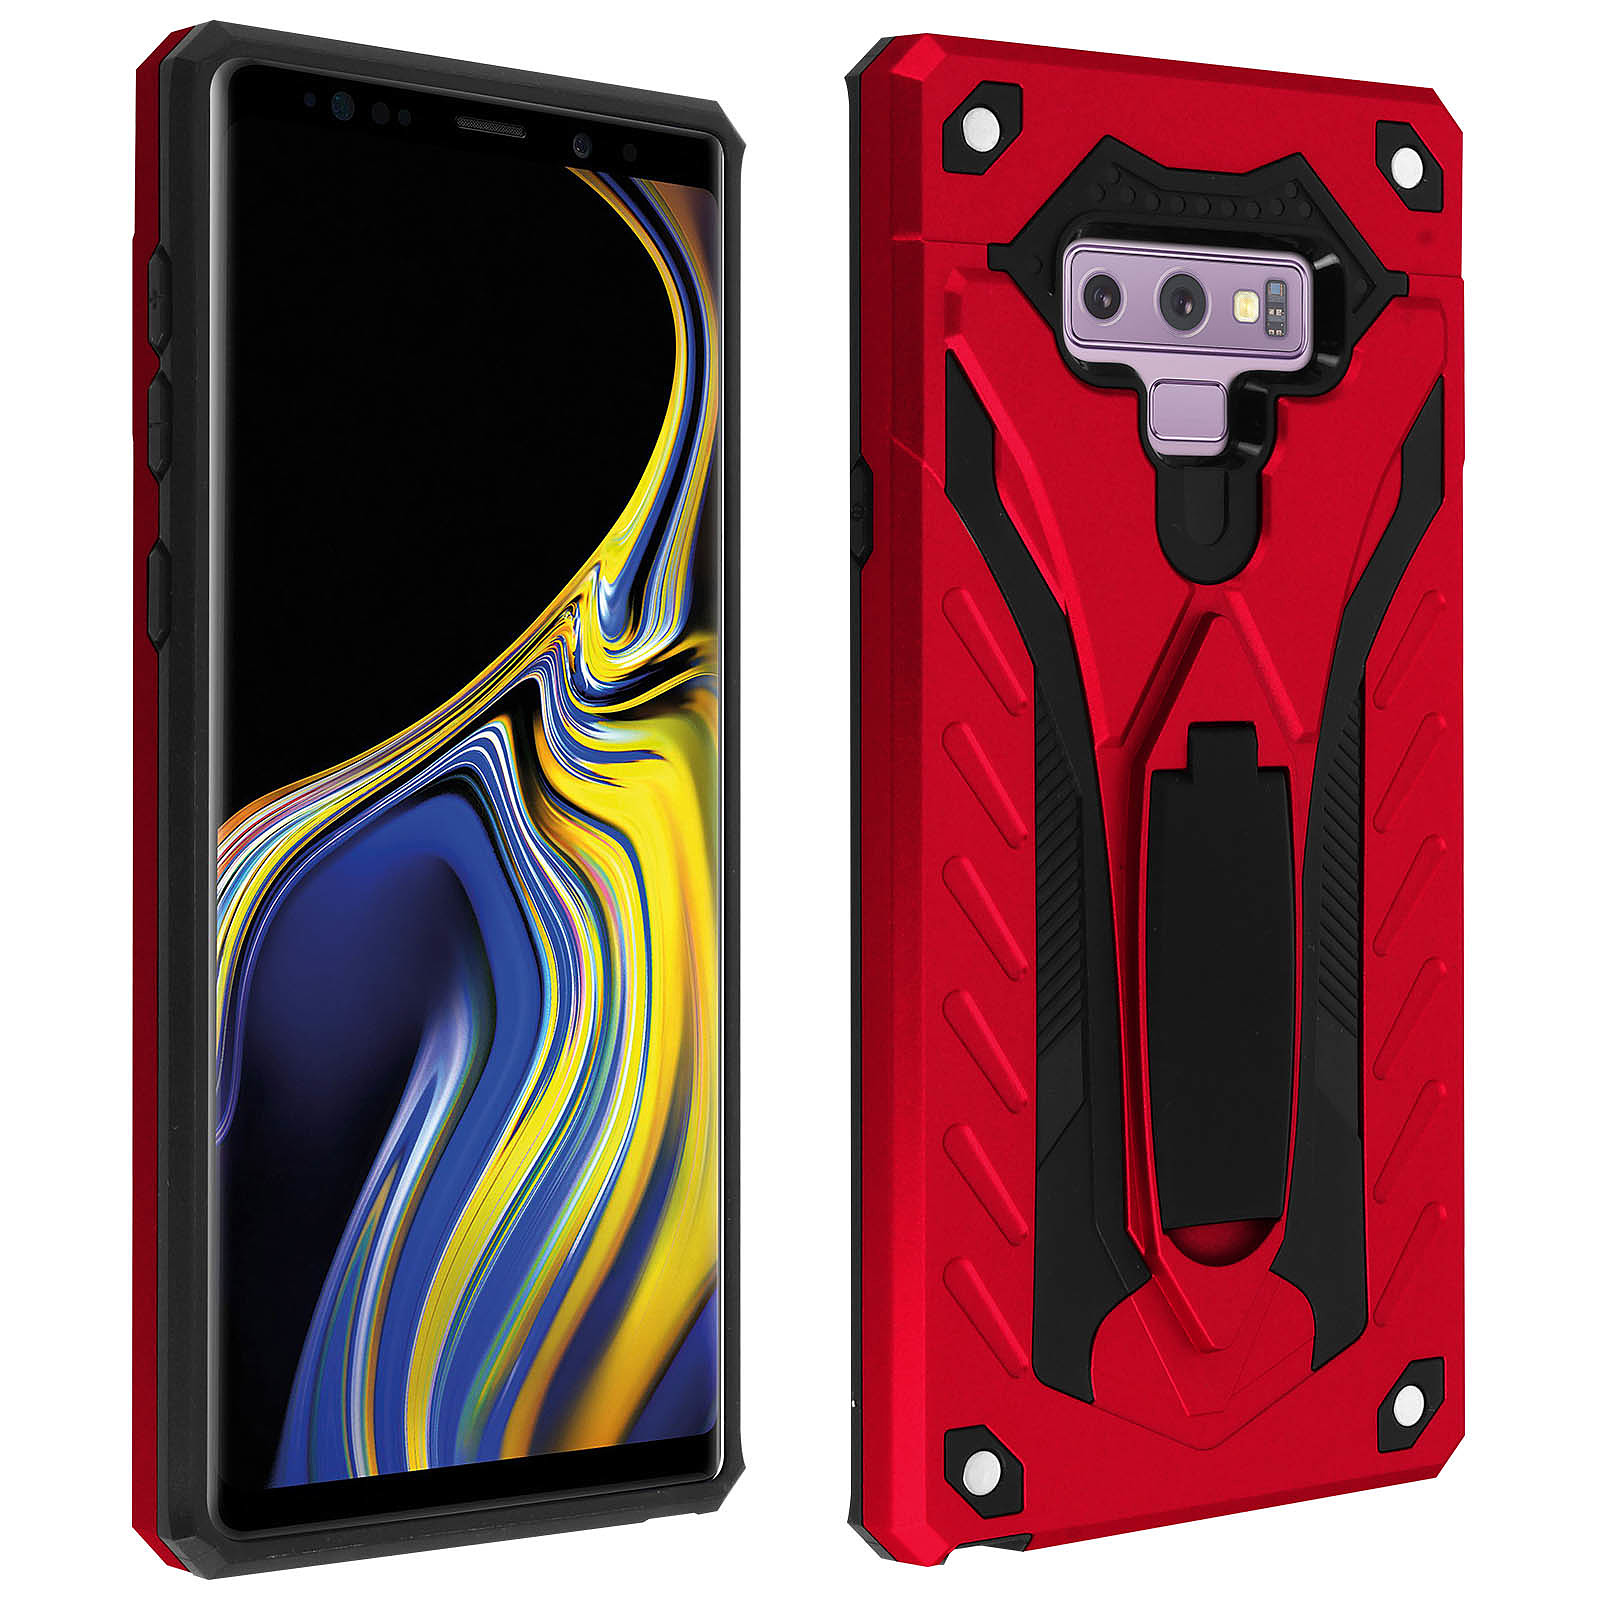 Avizar Coque Galaxy Note 9 Protection Bi-matière Antichoc Fonction Support - rouge - Coque telephone Avizar